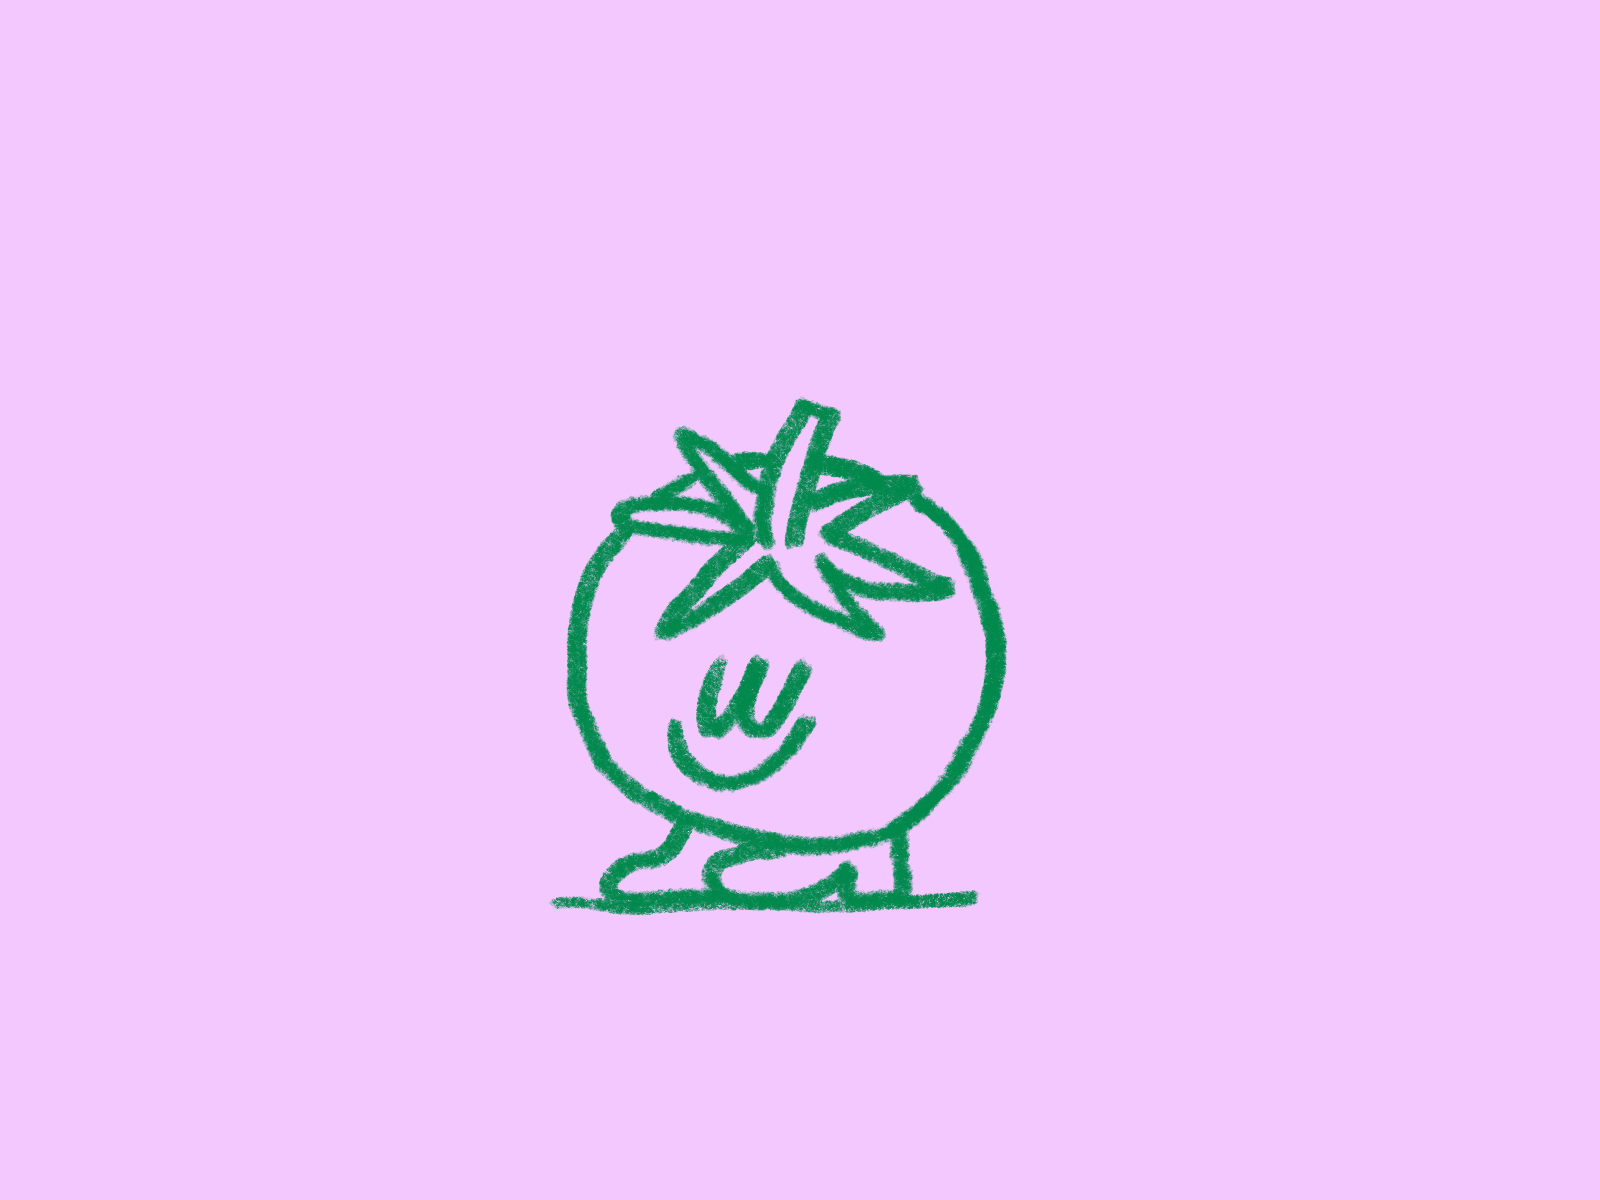 Mr Tomato animating animation character fancy frame by frame frame to frame gif illustration loop procreate shoes tomato vegetables veggie walking